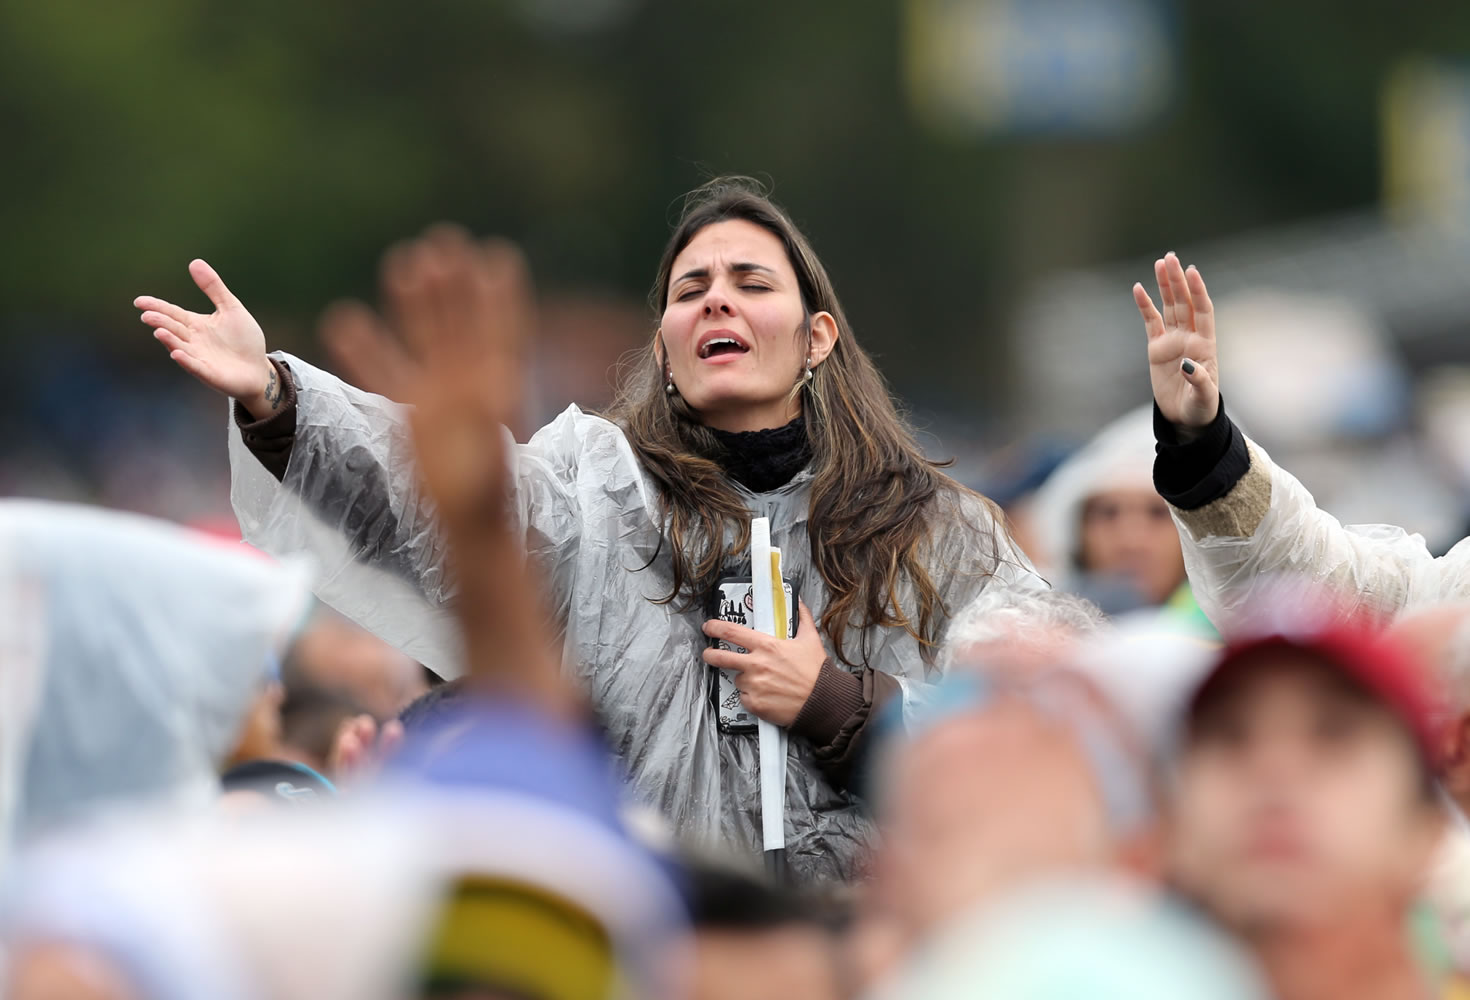 A woman prays during a Mass celebrated by Pope Francis outside the Aparecida Basilica in Aparecida, Brazil, on Wednesday.